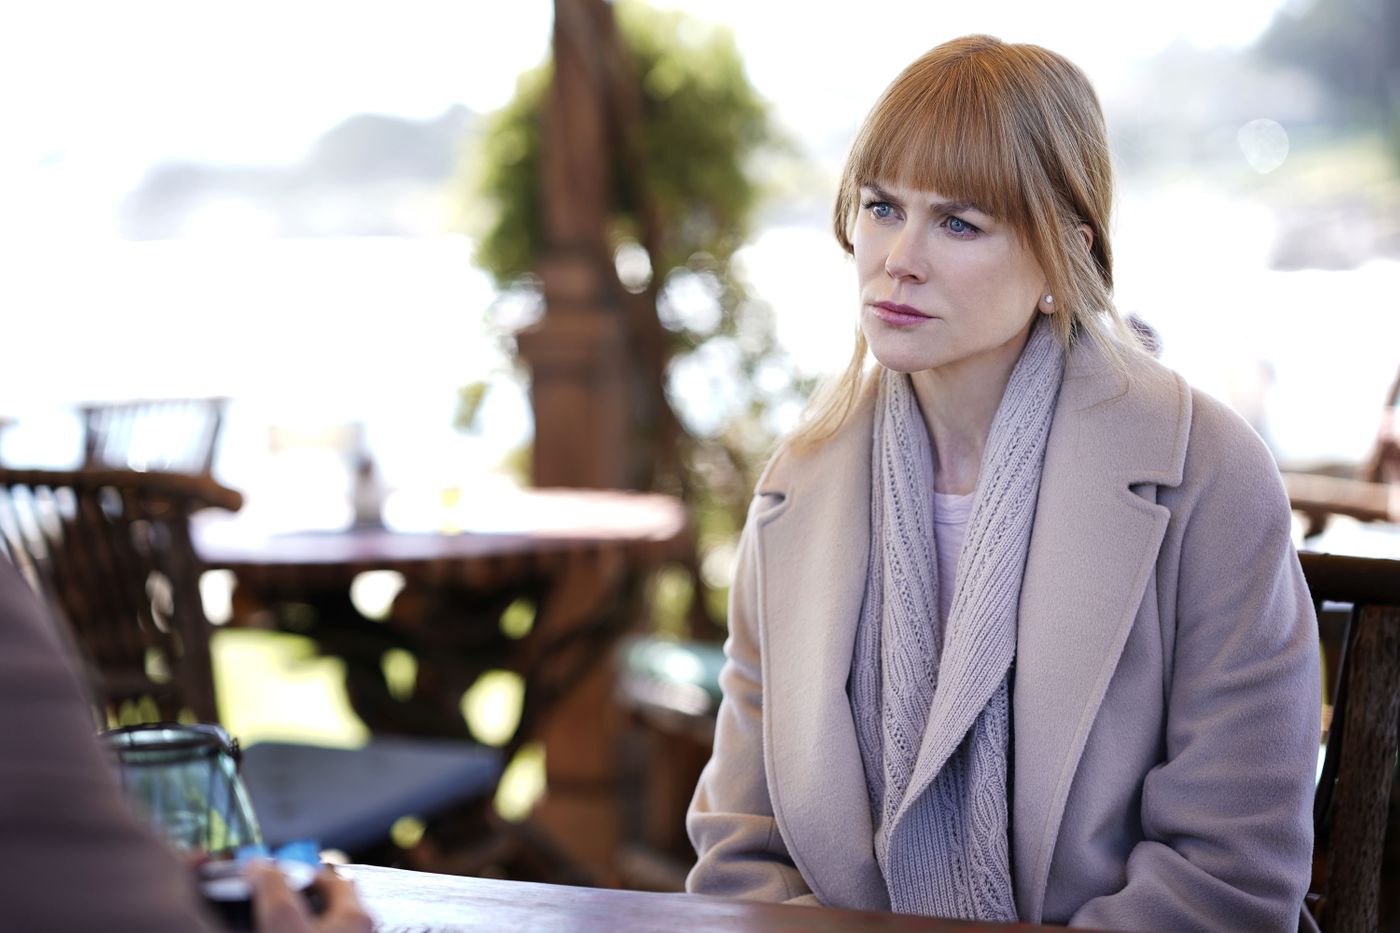 Big Little Lies Final Episode: Who Died? Who Is the Killer?